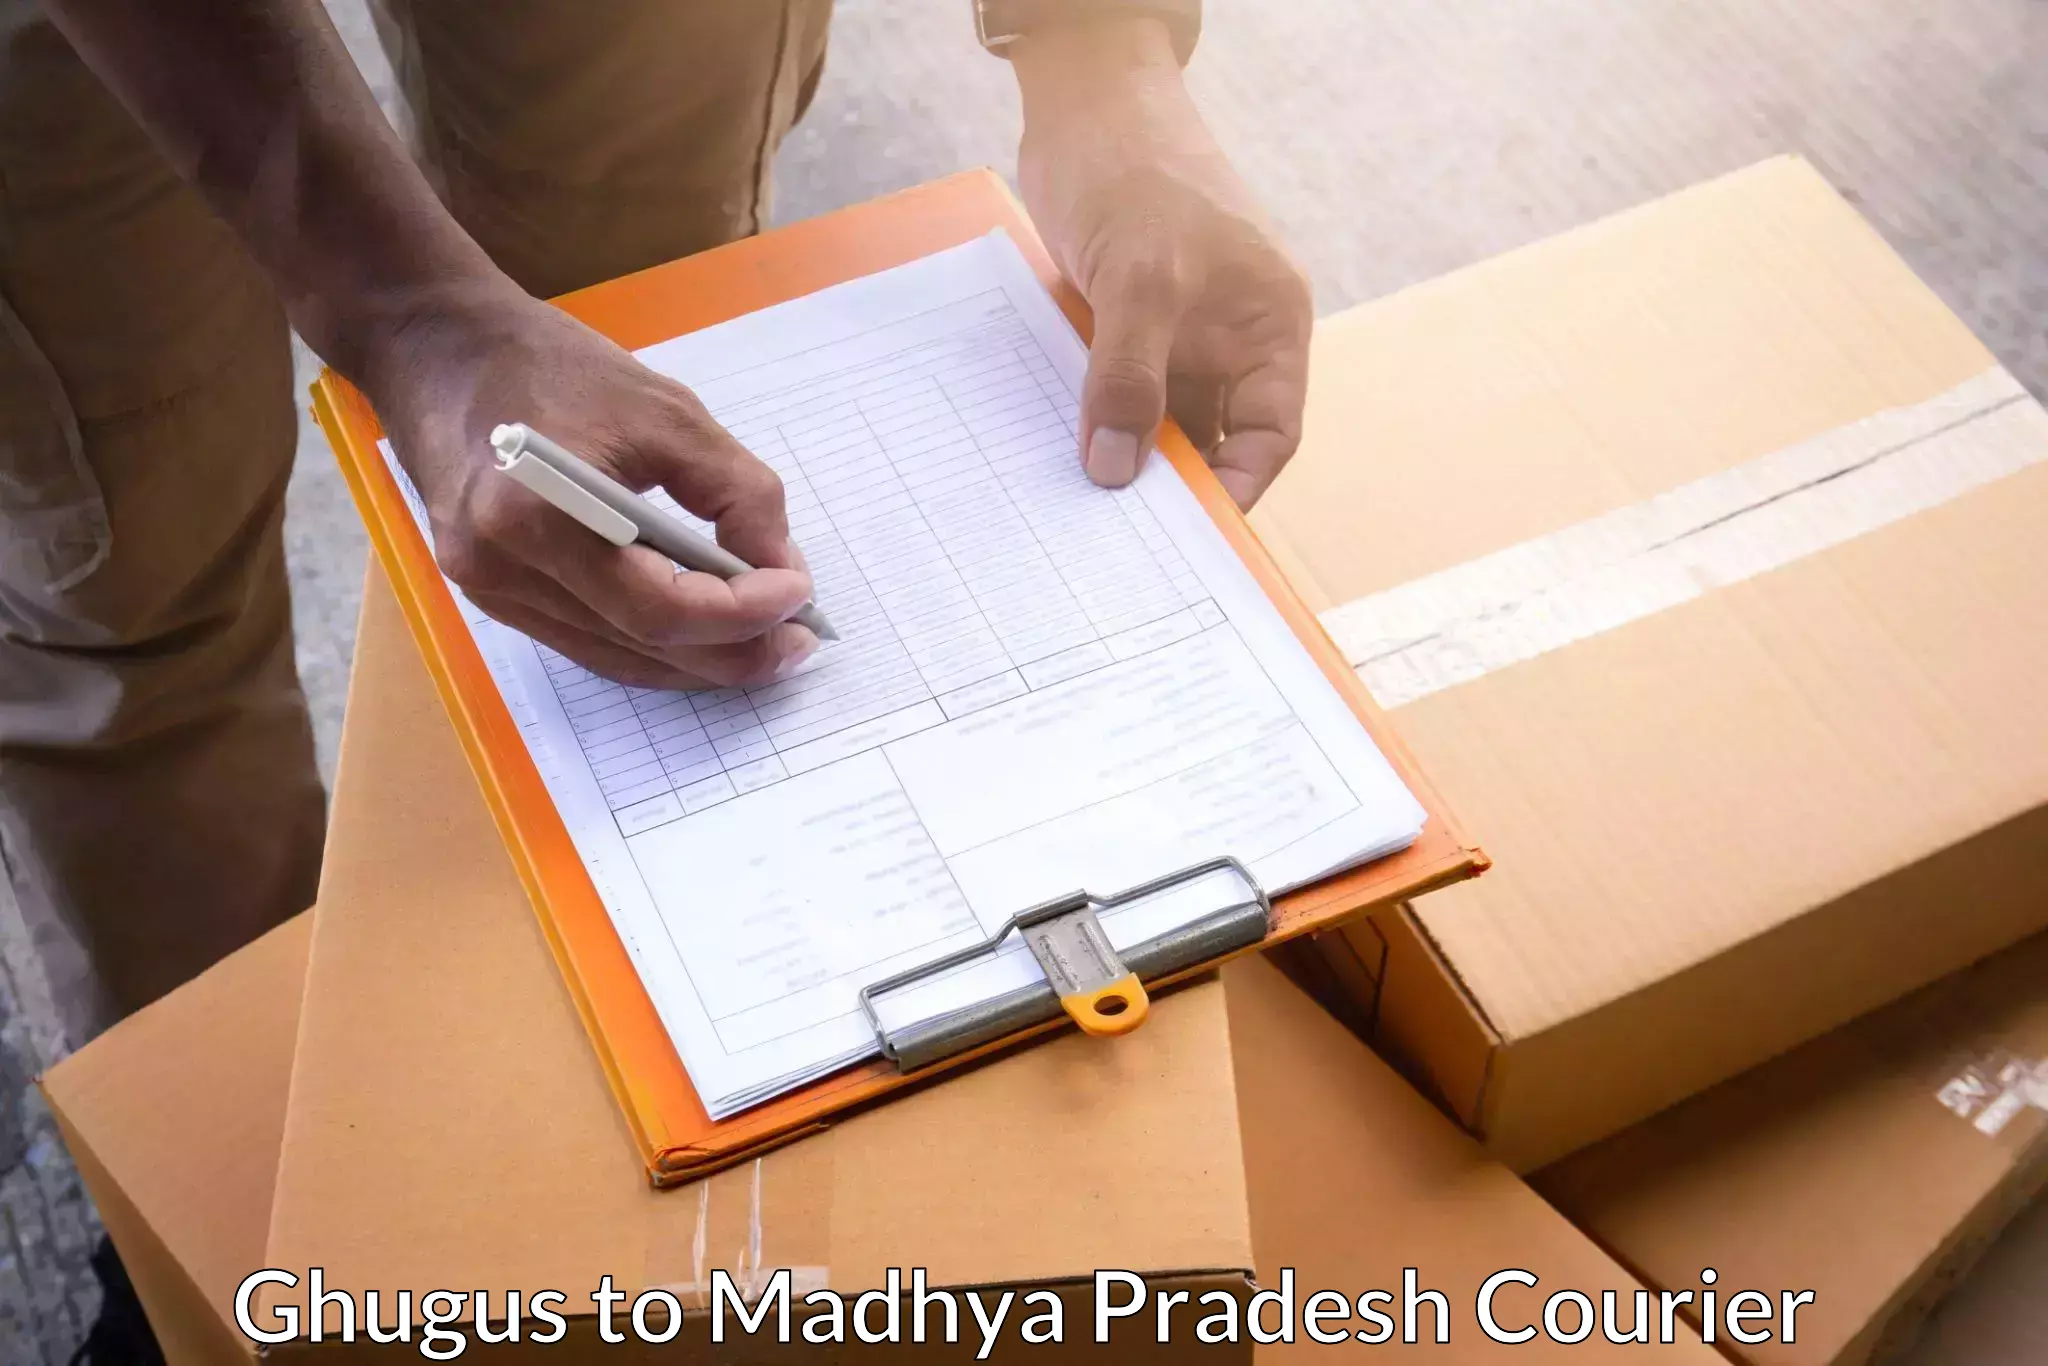 Courier service booking Ghugus to Thikri